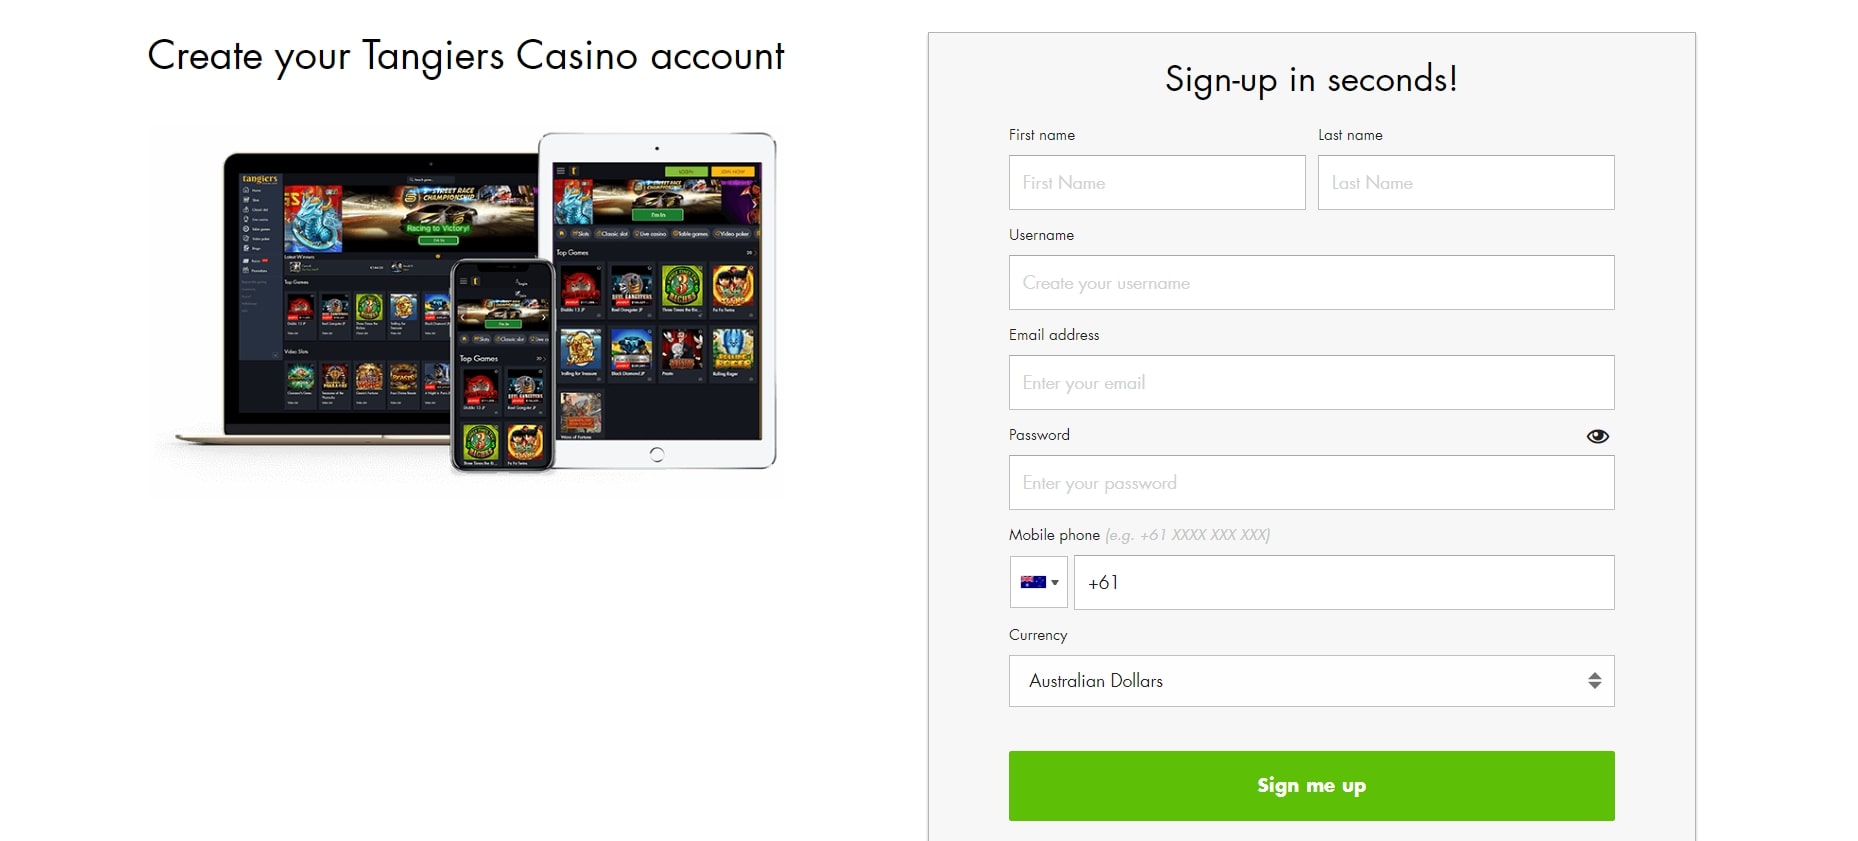 Sign Up to Win Real Money Online at Tangiers Casino